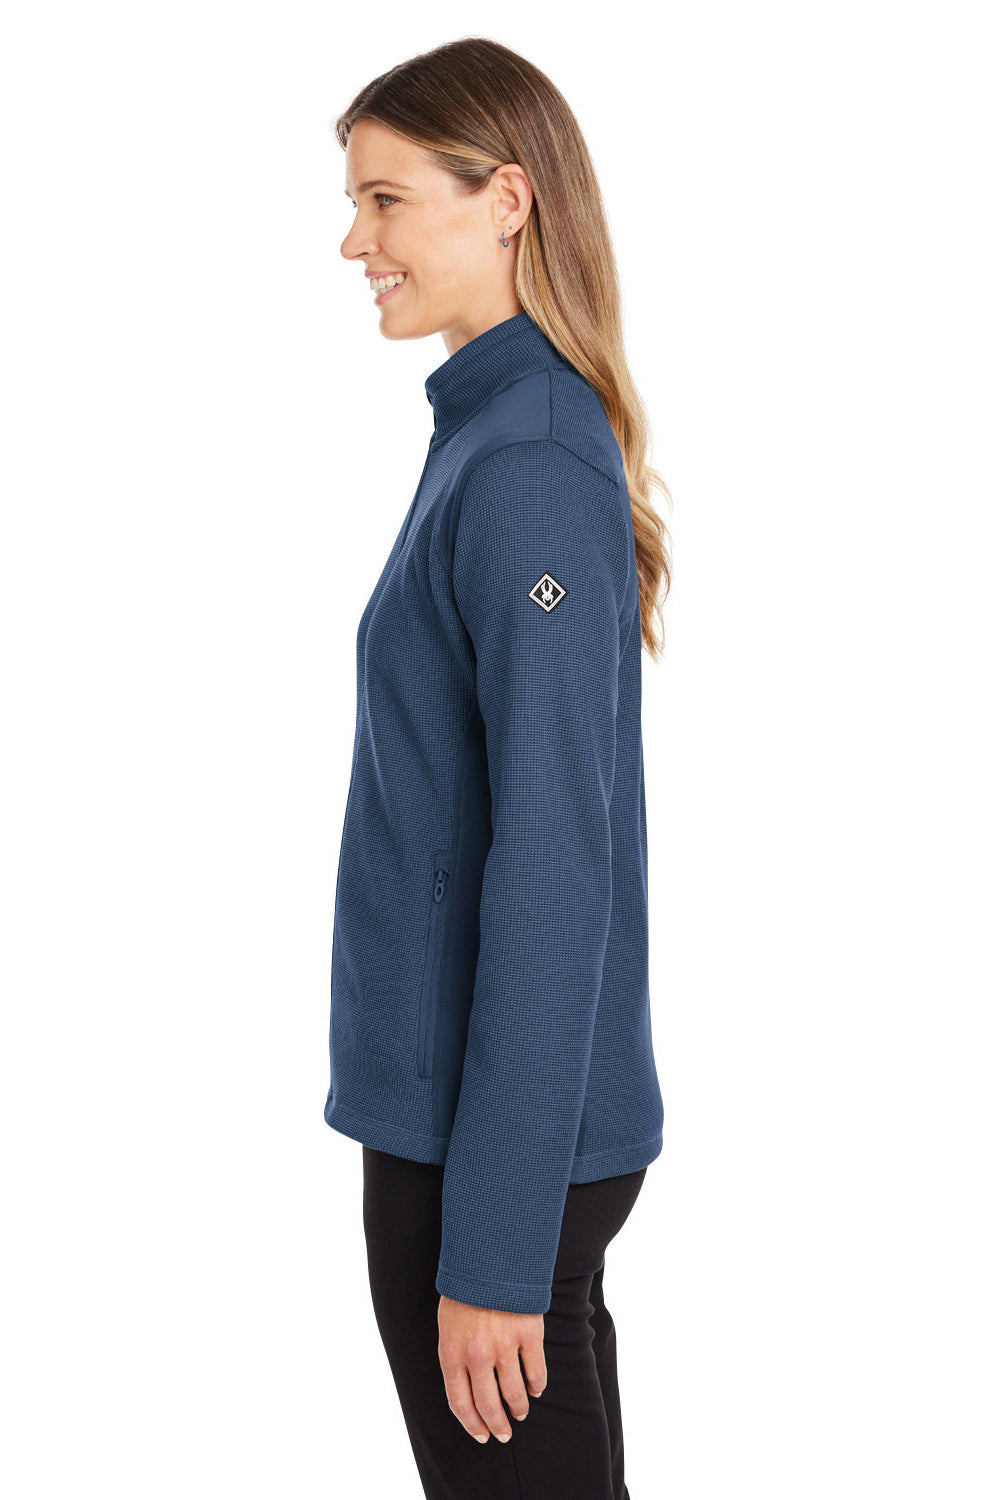 Spyder S17937 Womens Constant Canyon Full Zip Sweater Jacket Frontier Blue Side